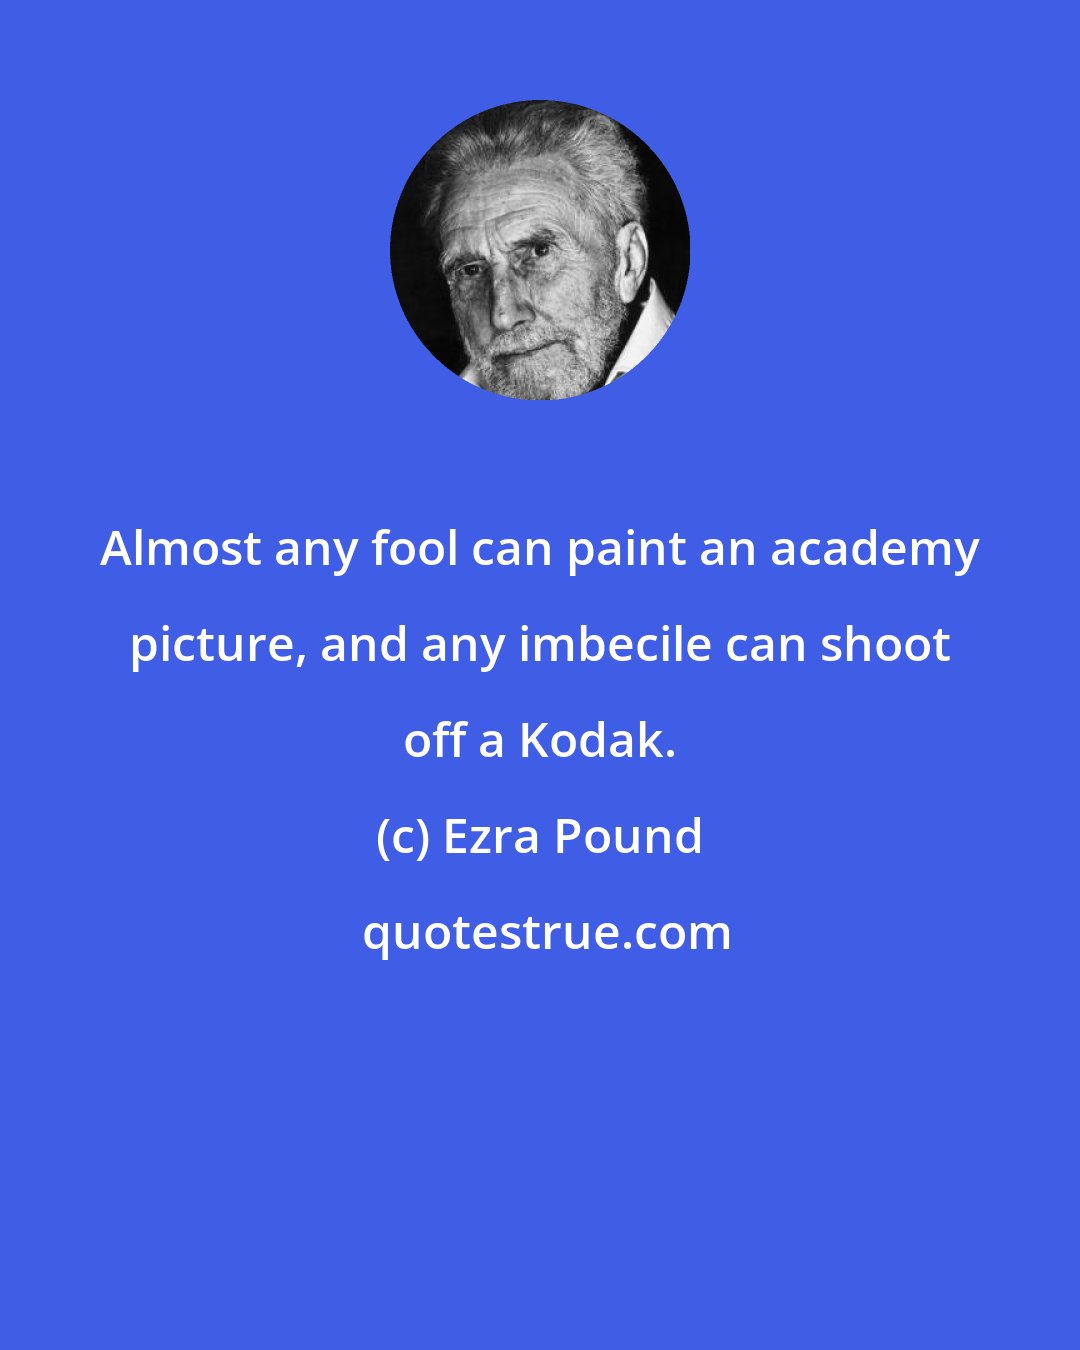 Ezra Pound: Almost any fool can paint an academy picture, and any imbecile can shoot off a Kodak.